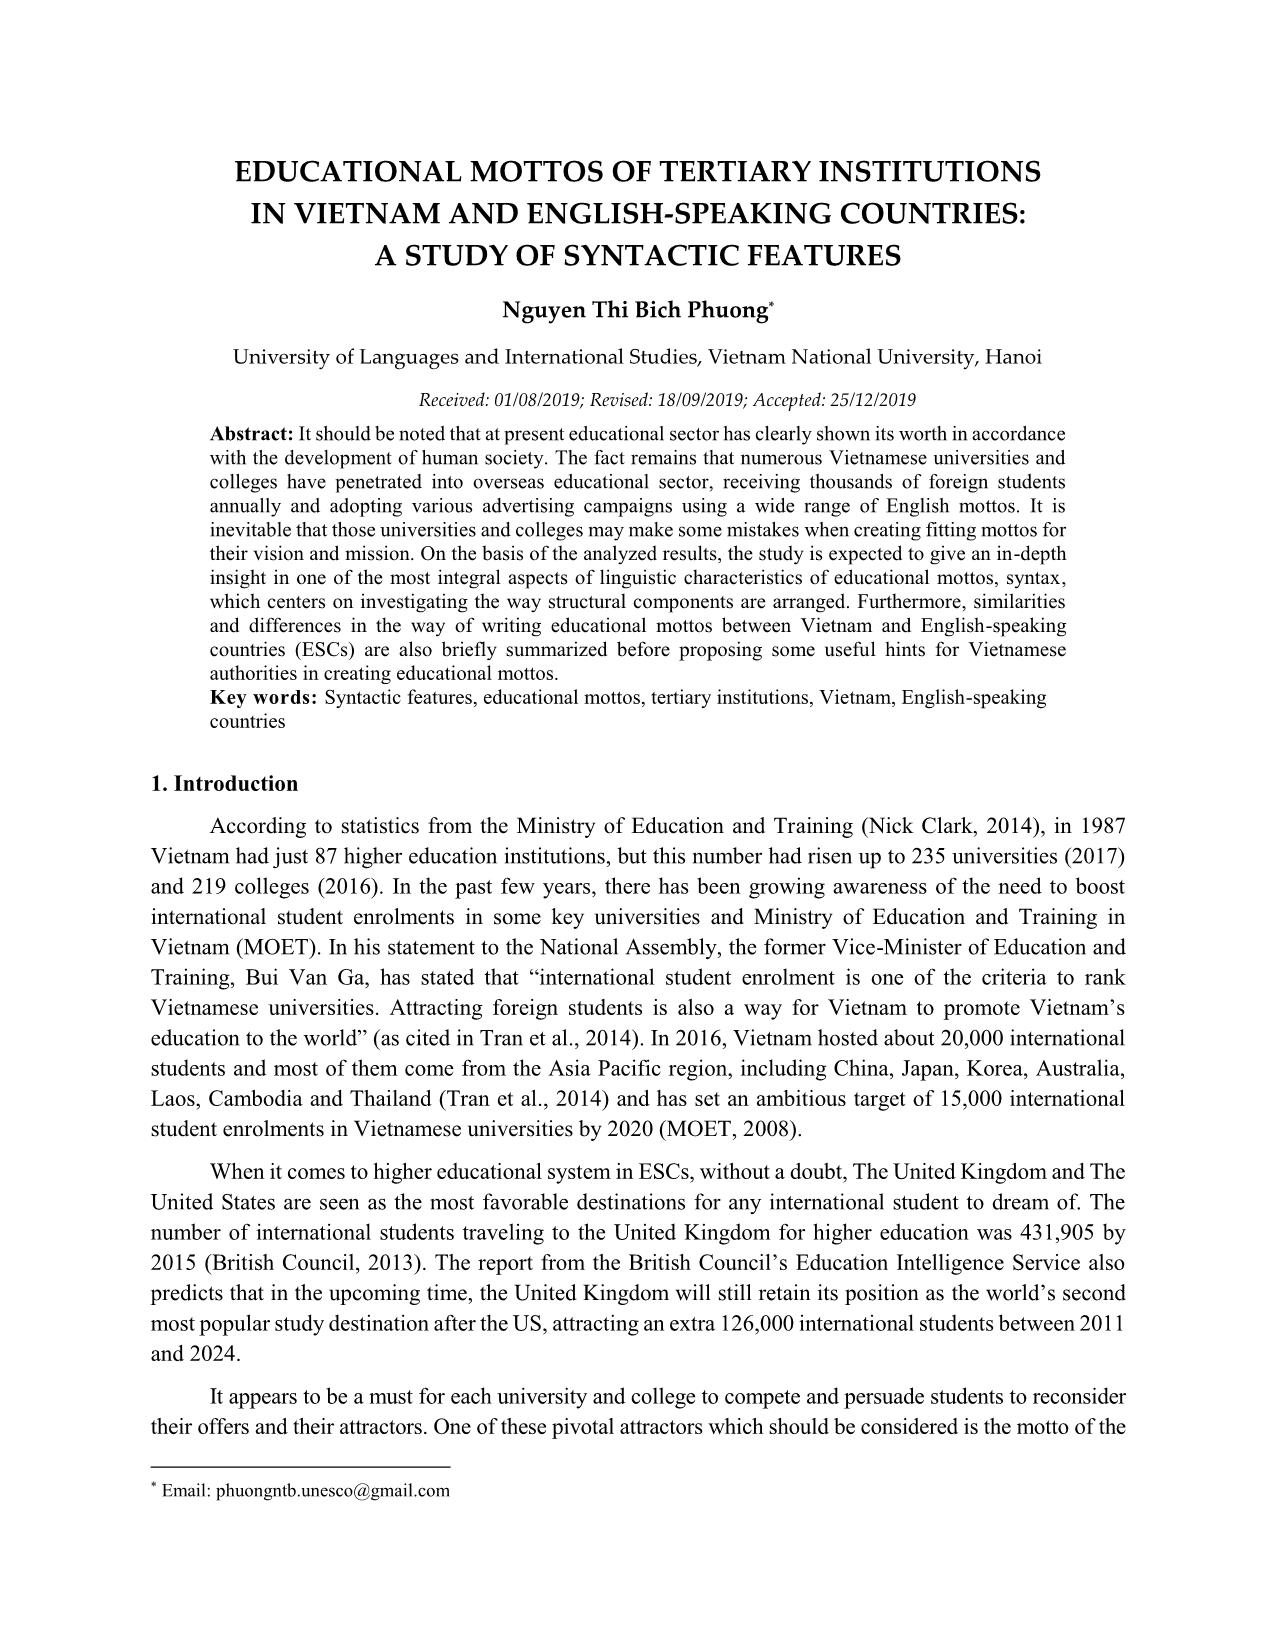 Educational mottos of tertiary institutions in Vietnam and English-Speaking countries: A study of syntactic features trang 1